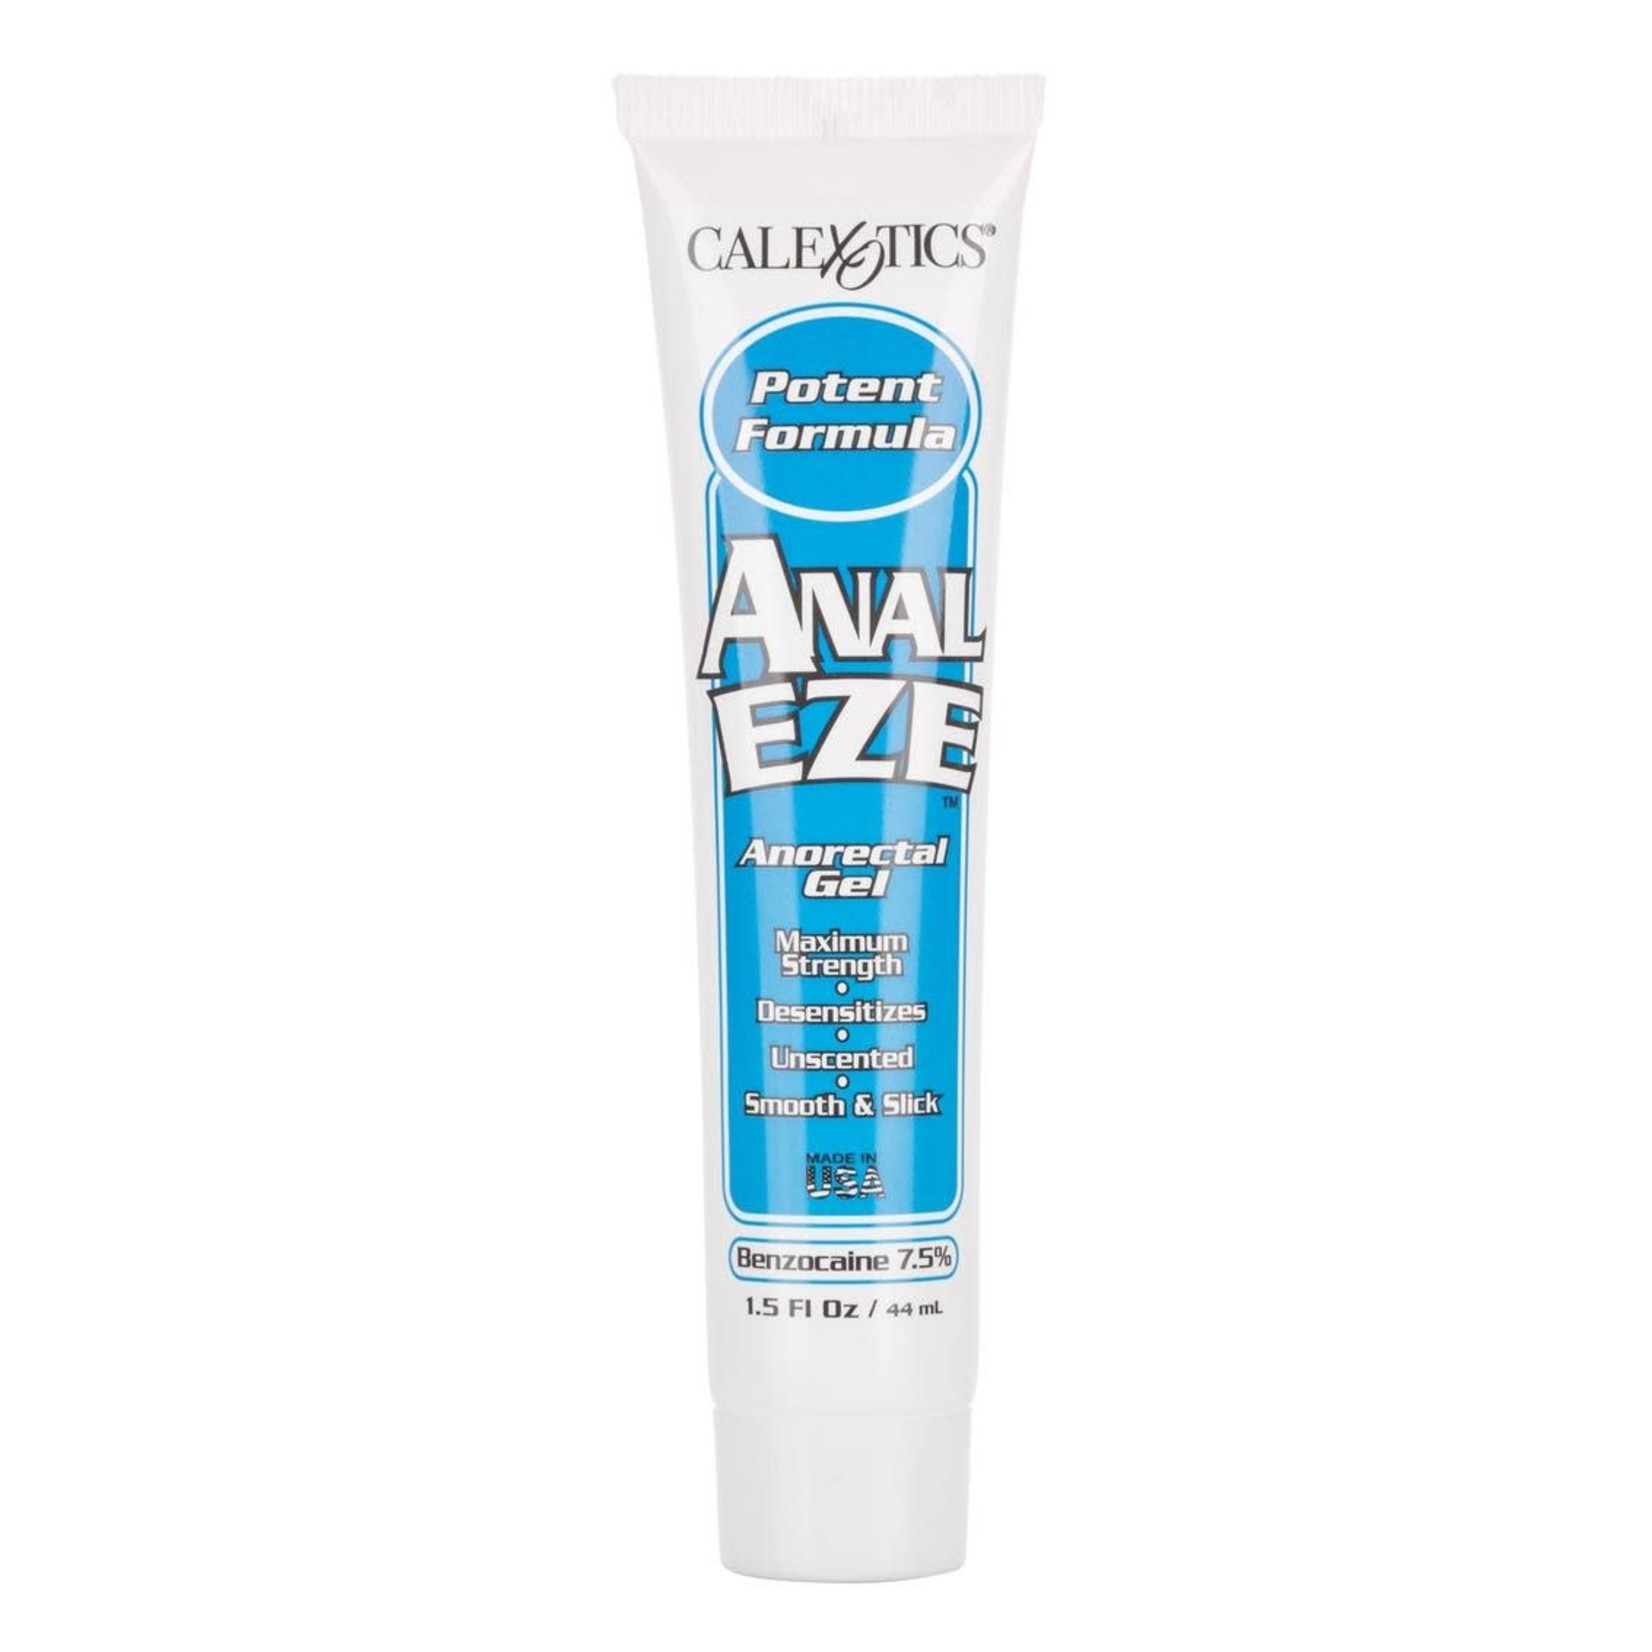 Anal Eze Anorectal Gel 1.5oz (Boxed)